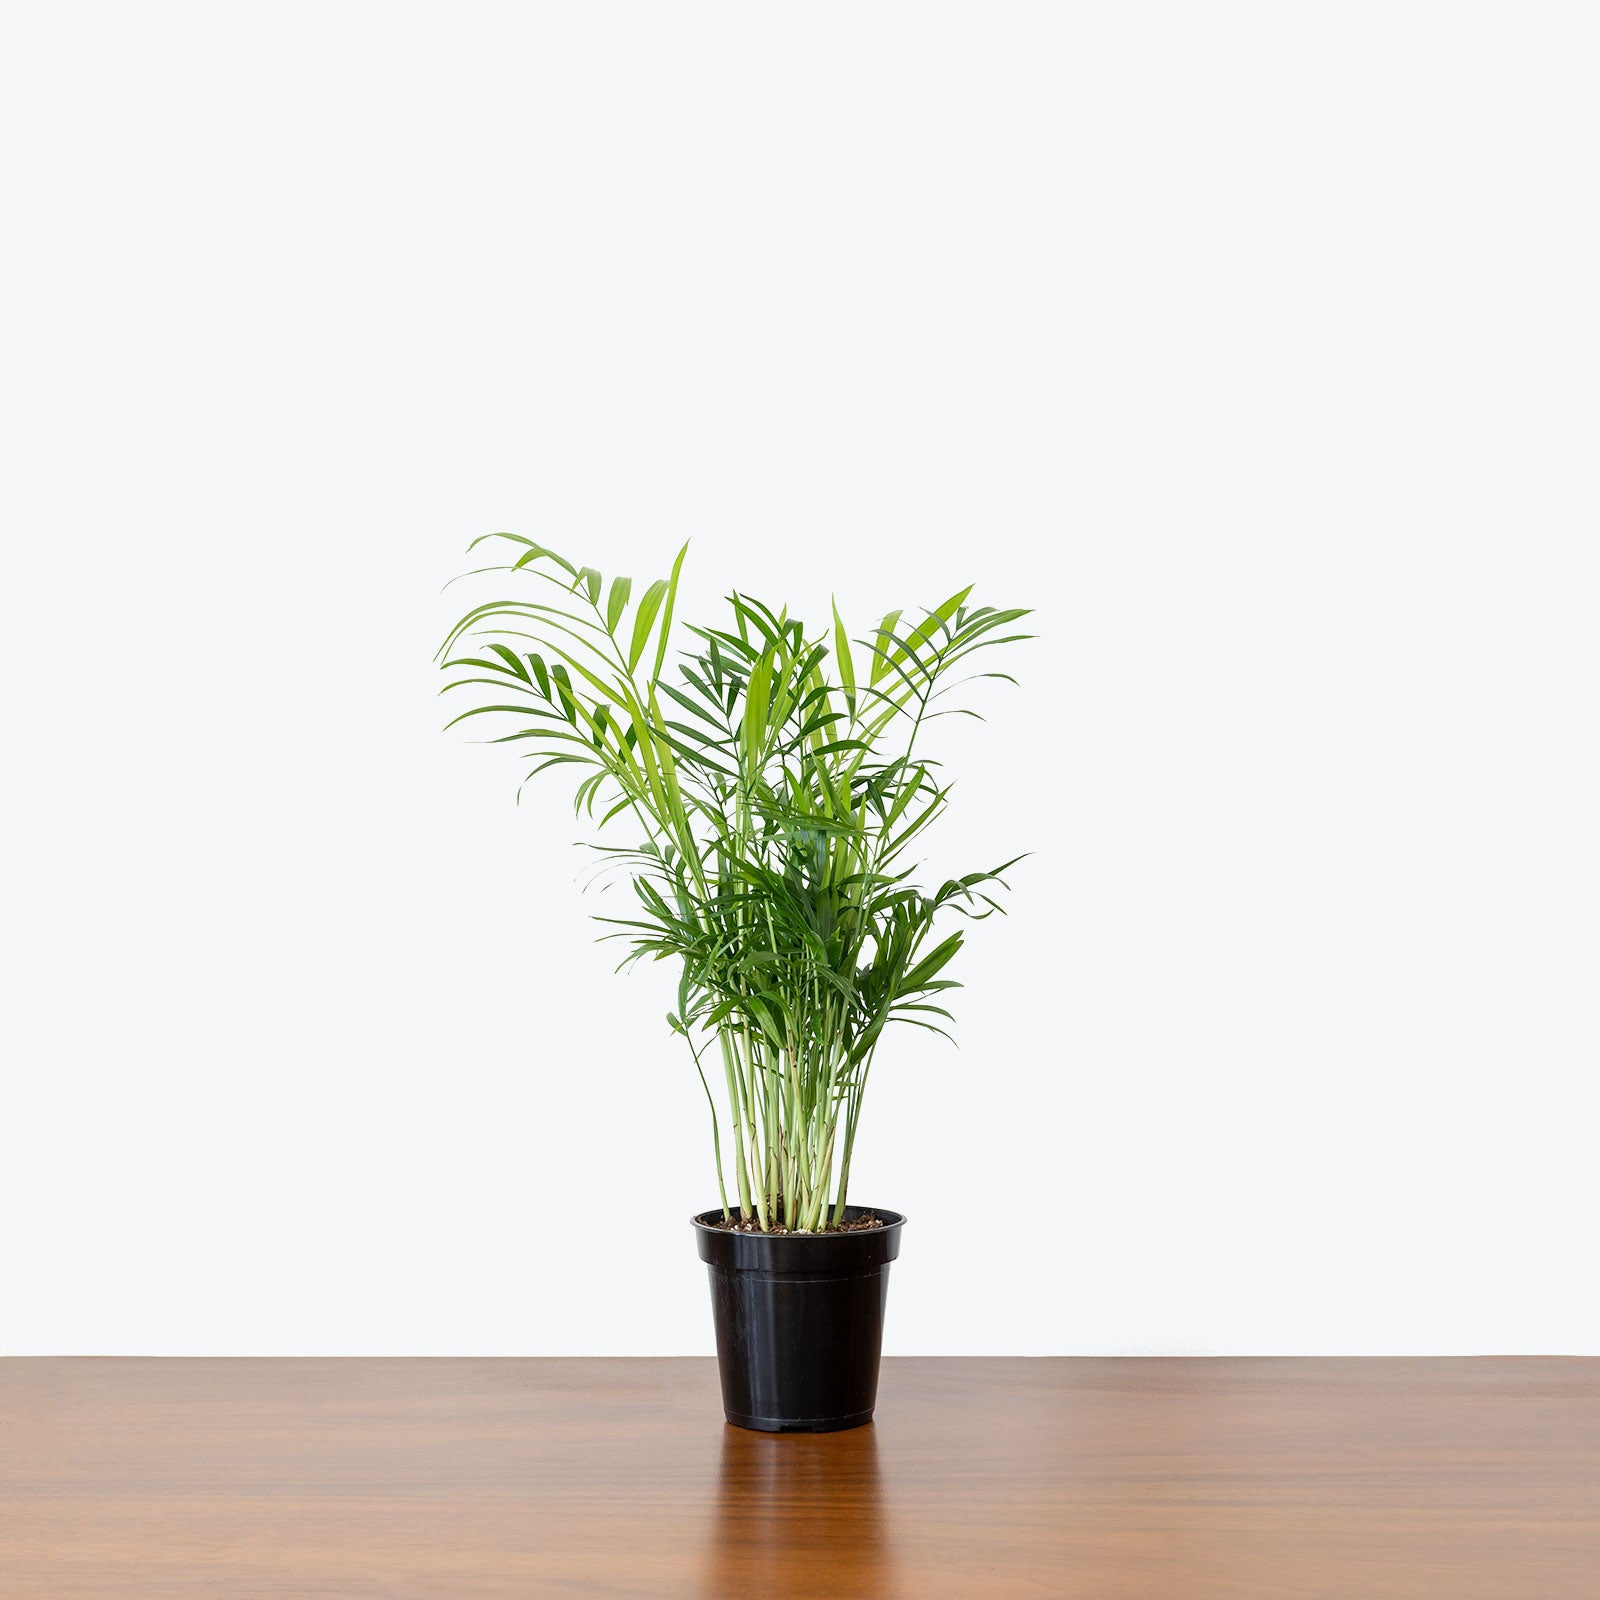 Best Selling Duo Parlor Palm in 3D Printed Eco Friendly Planter - House Plants Delivery Toronto - JOMO Studio